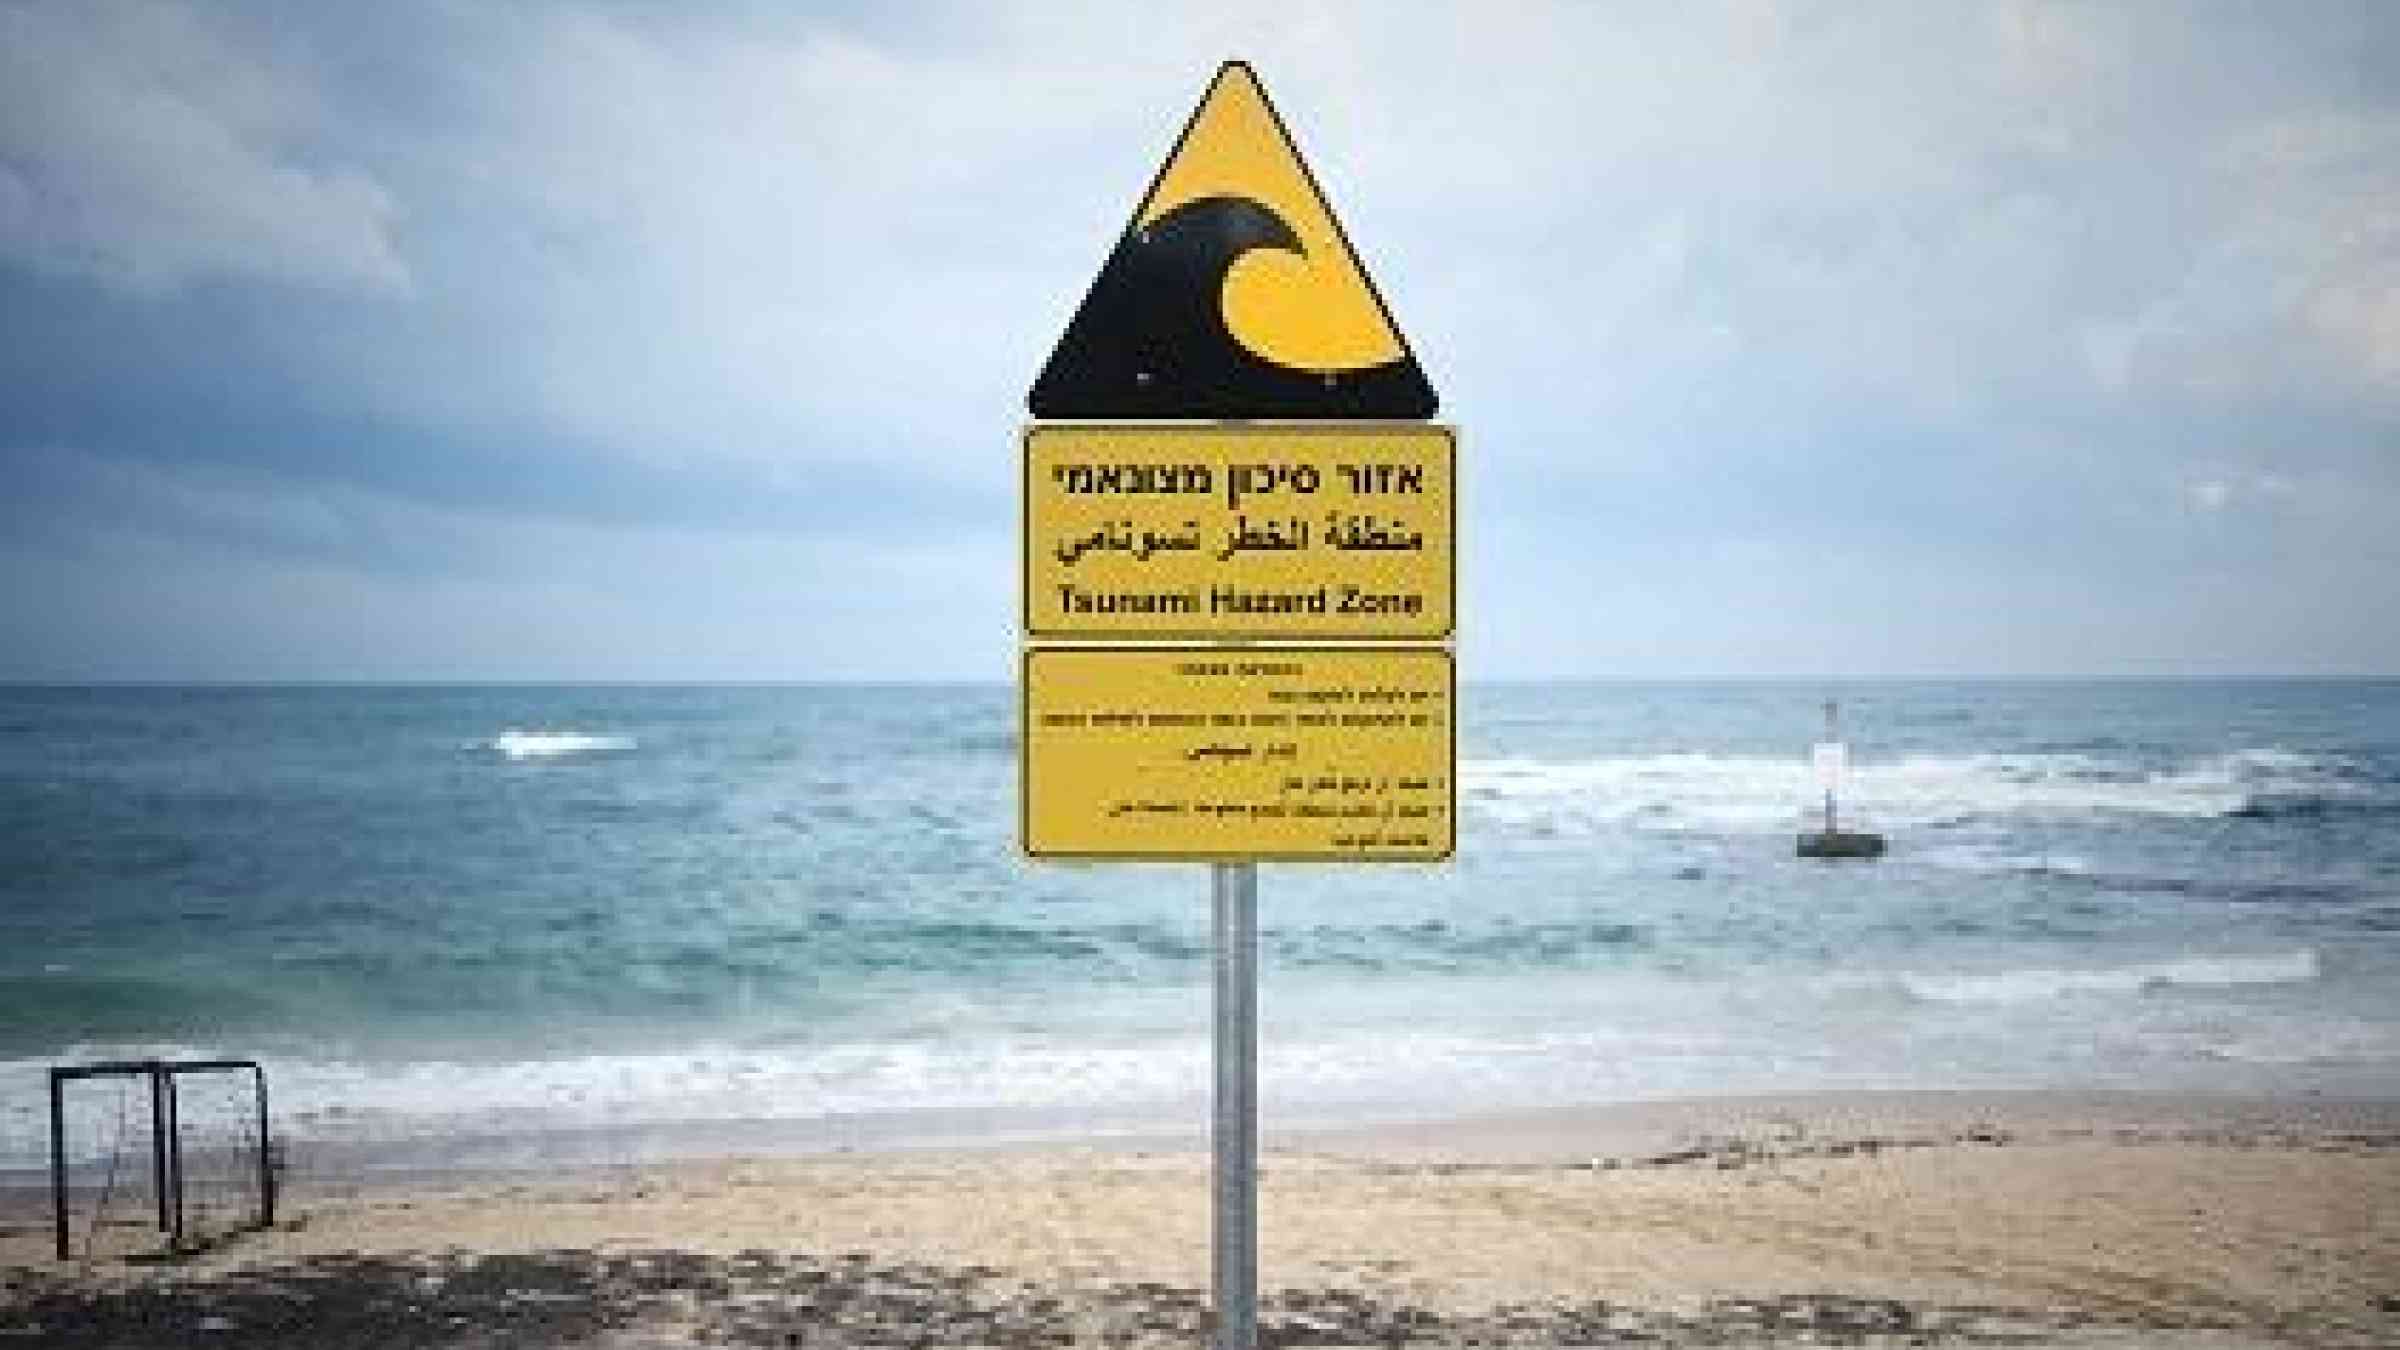 Warning signs are a critical way to raise public awareness of the risk of tsunamis. Israel dotted its coast with them in the run-up to an exercise this year. (Photo: National Emergency Management Authority of Israel)